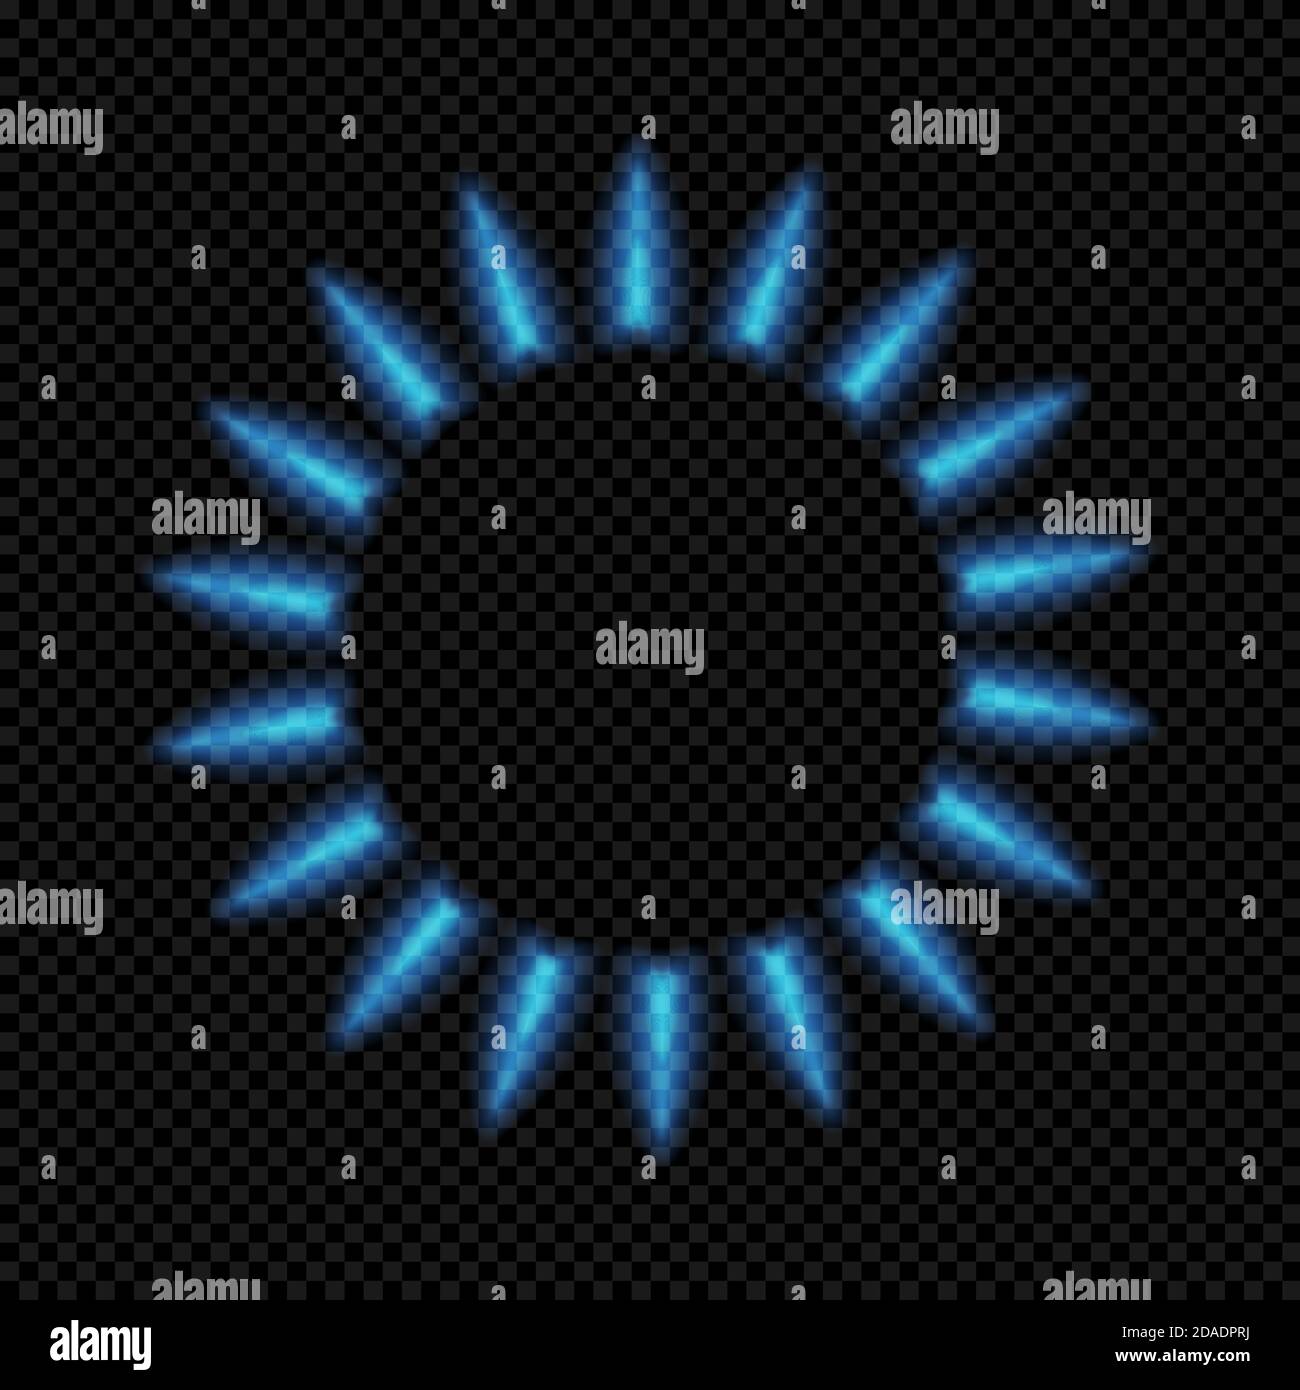 Blue fire on a dark transparent background. Isolated vector illustration. Stock Vector